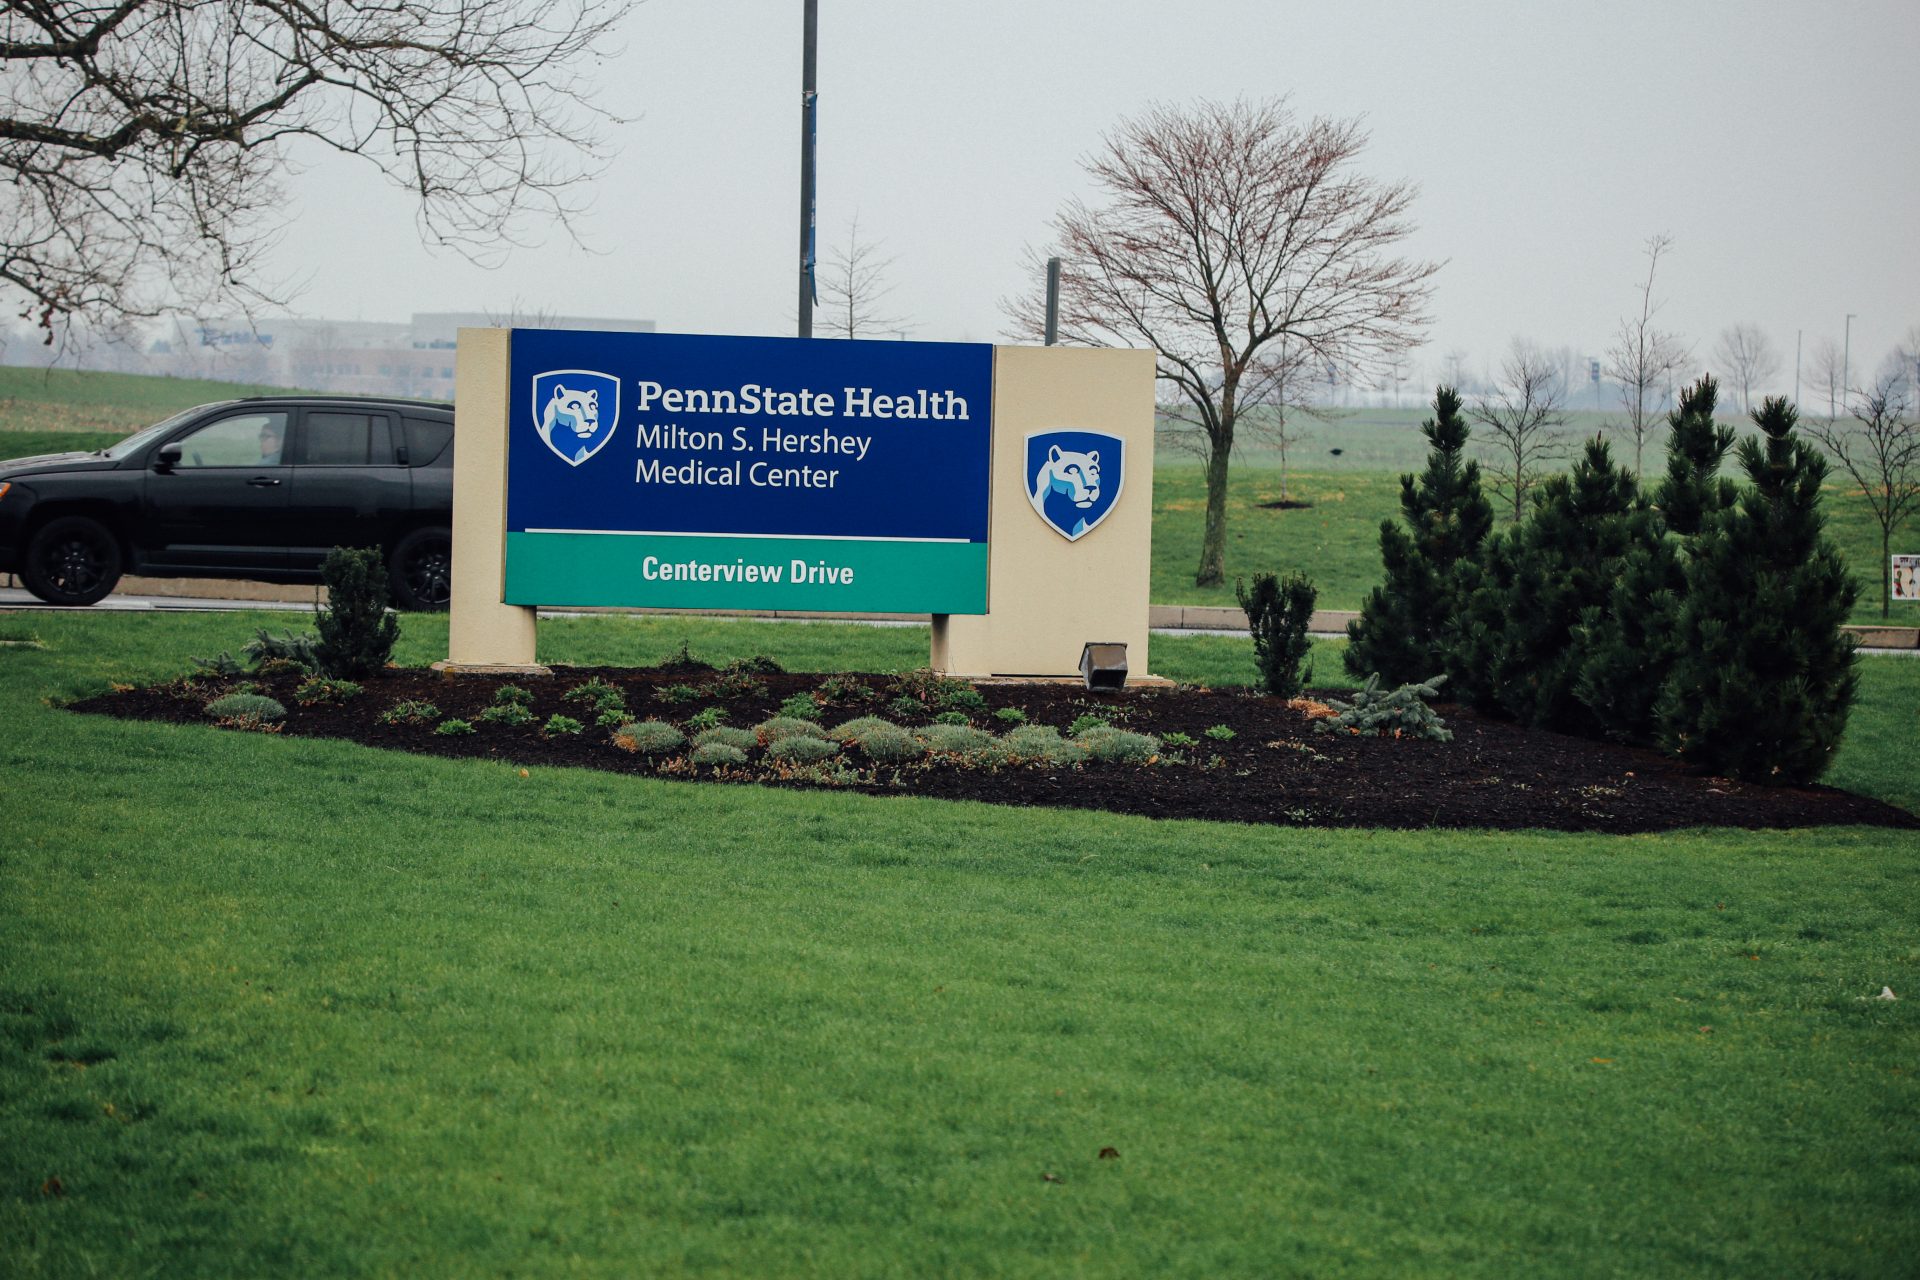 A car passes behind the entrance sign at Penn State Health's Milton S. Hershey Medical Center on April 1, 2020.